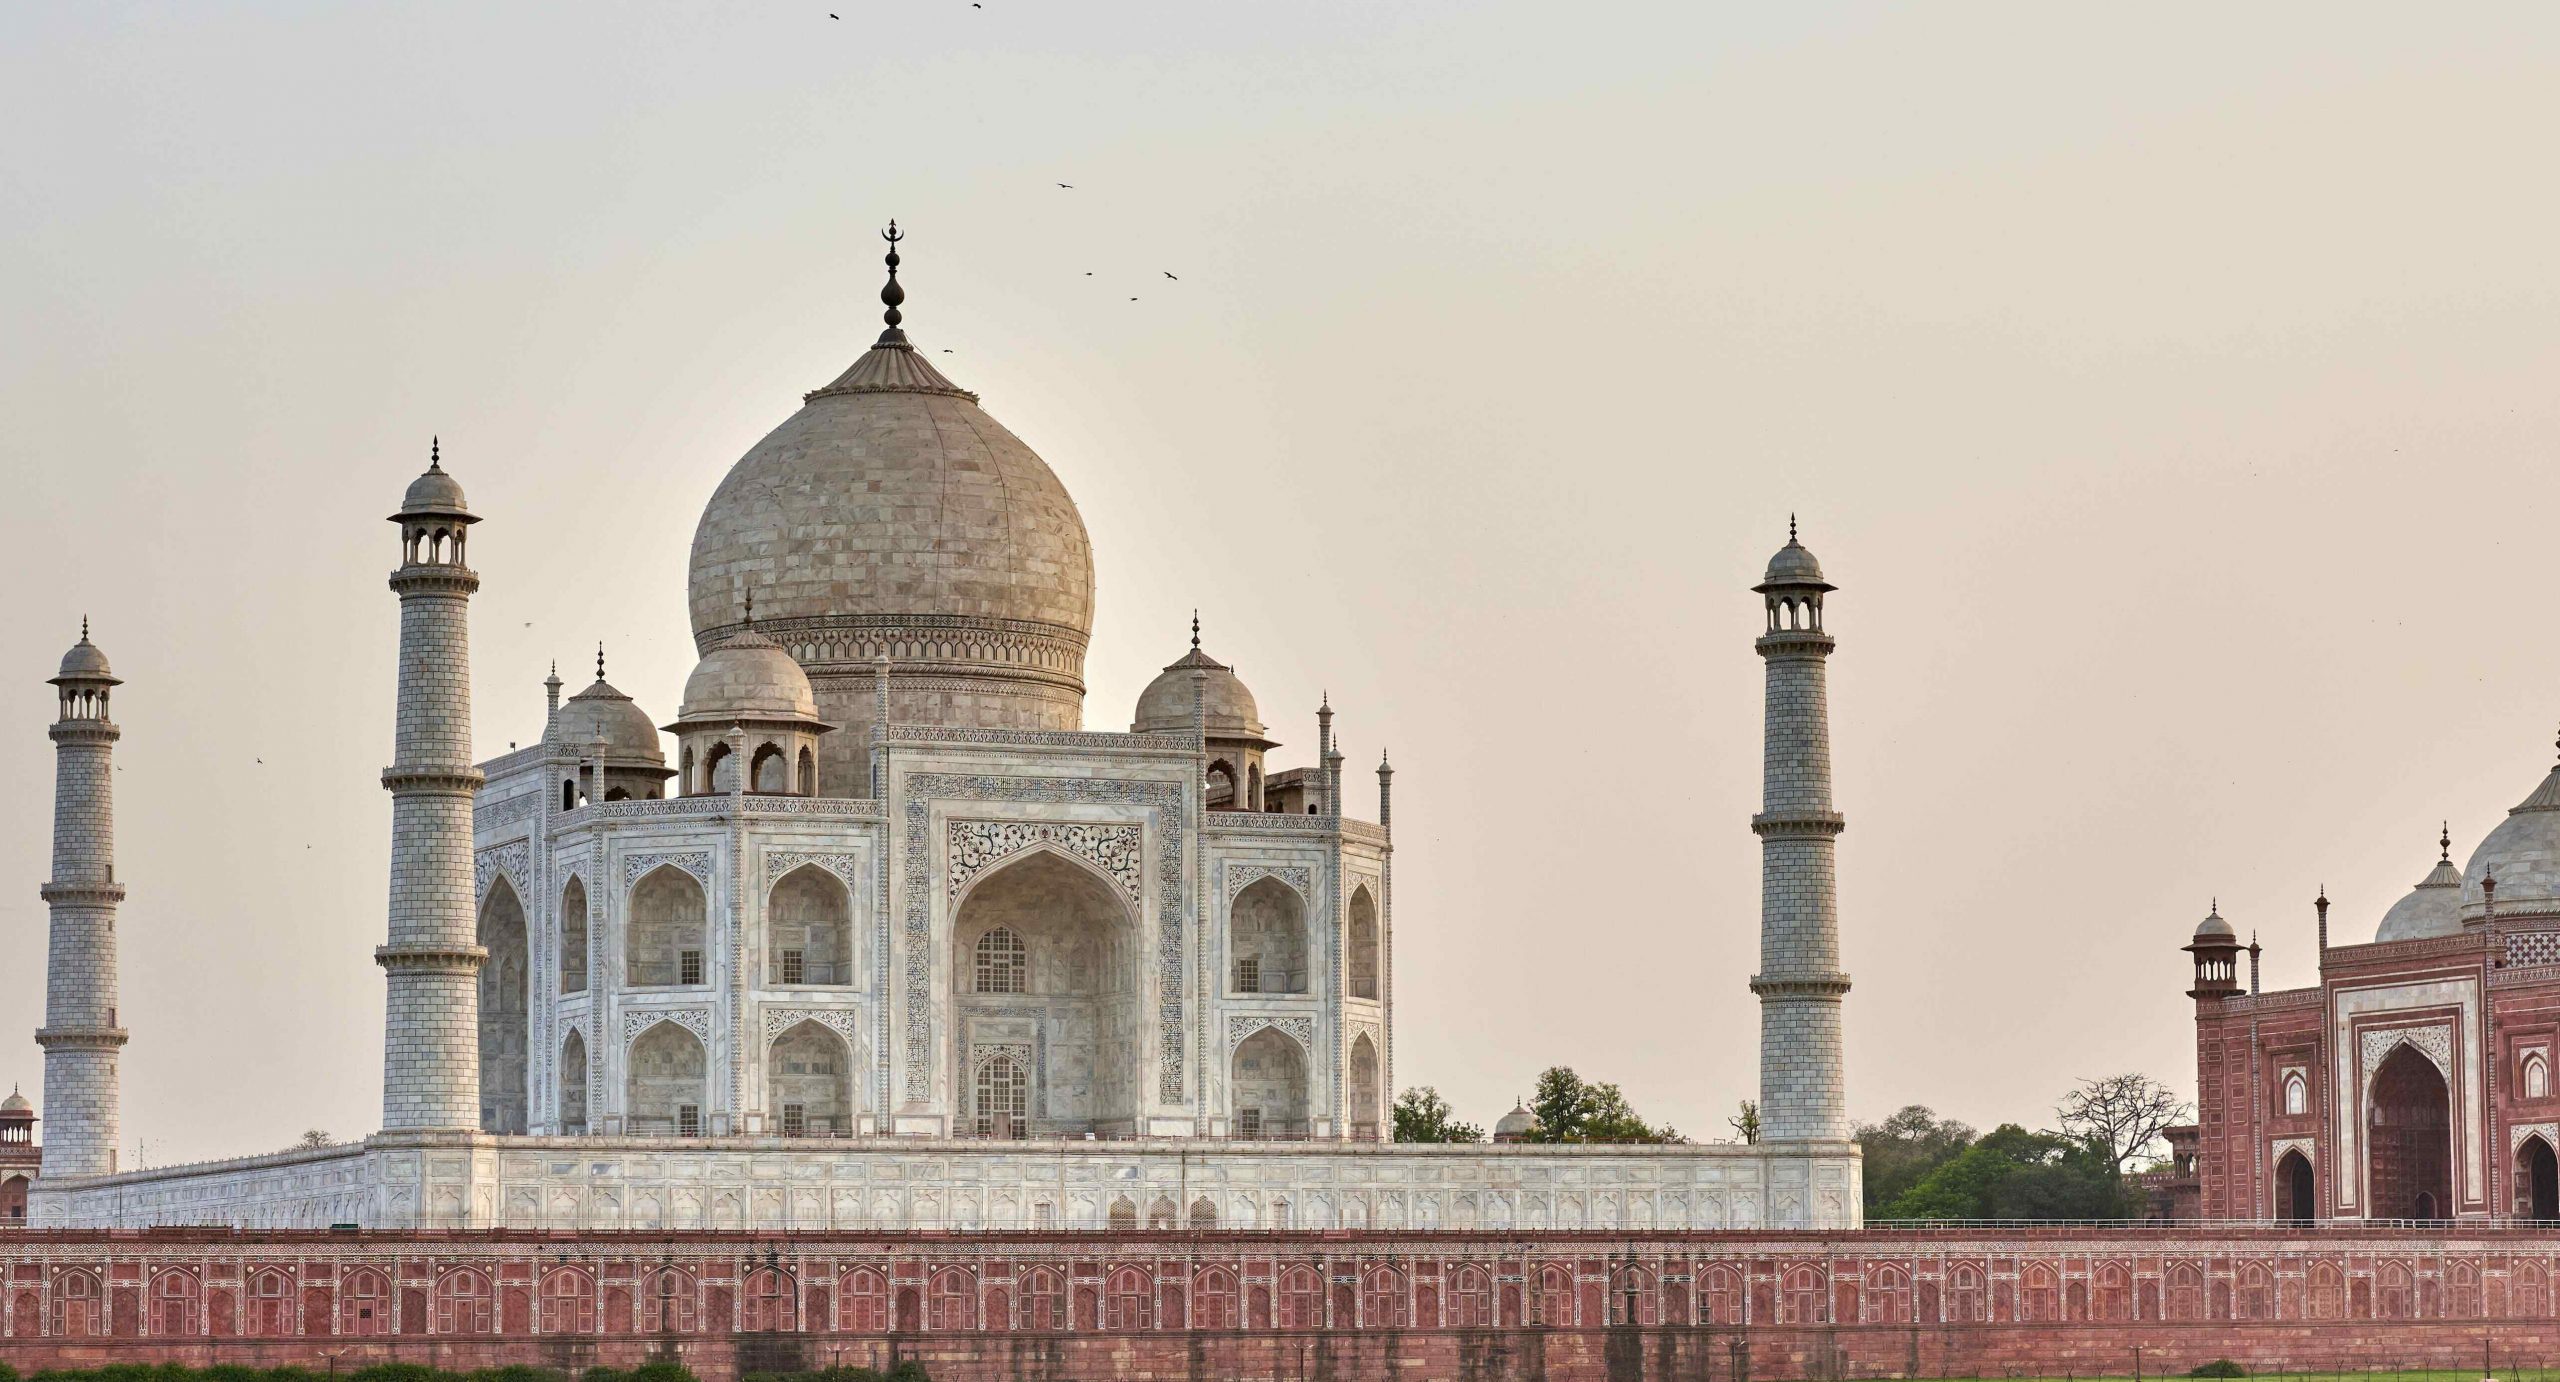 Journey to the Jewel of Agra - Things to do at Taj Mahal